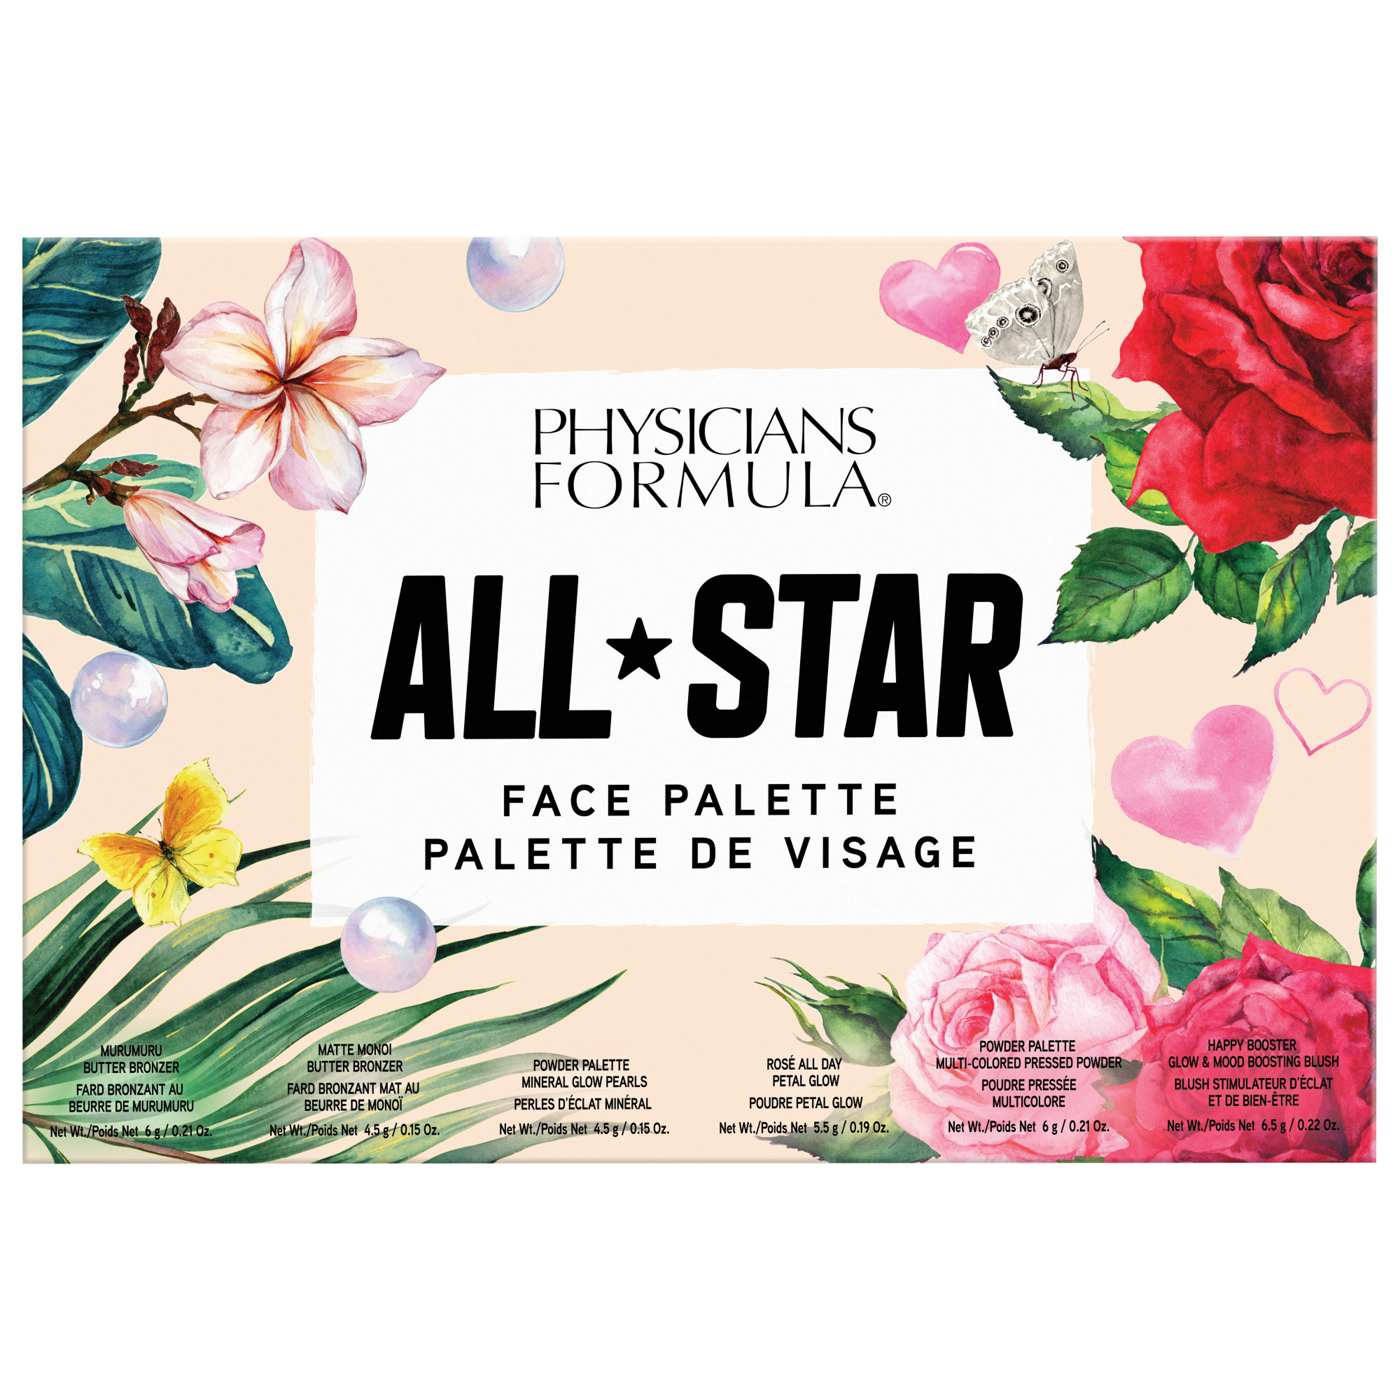 Physicians Formula All Star Face Palette; image 1 of 3